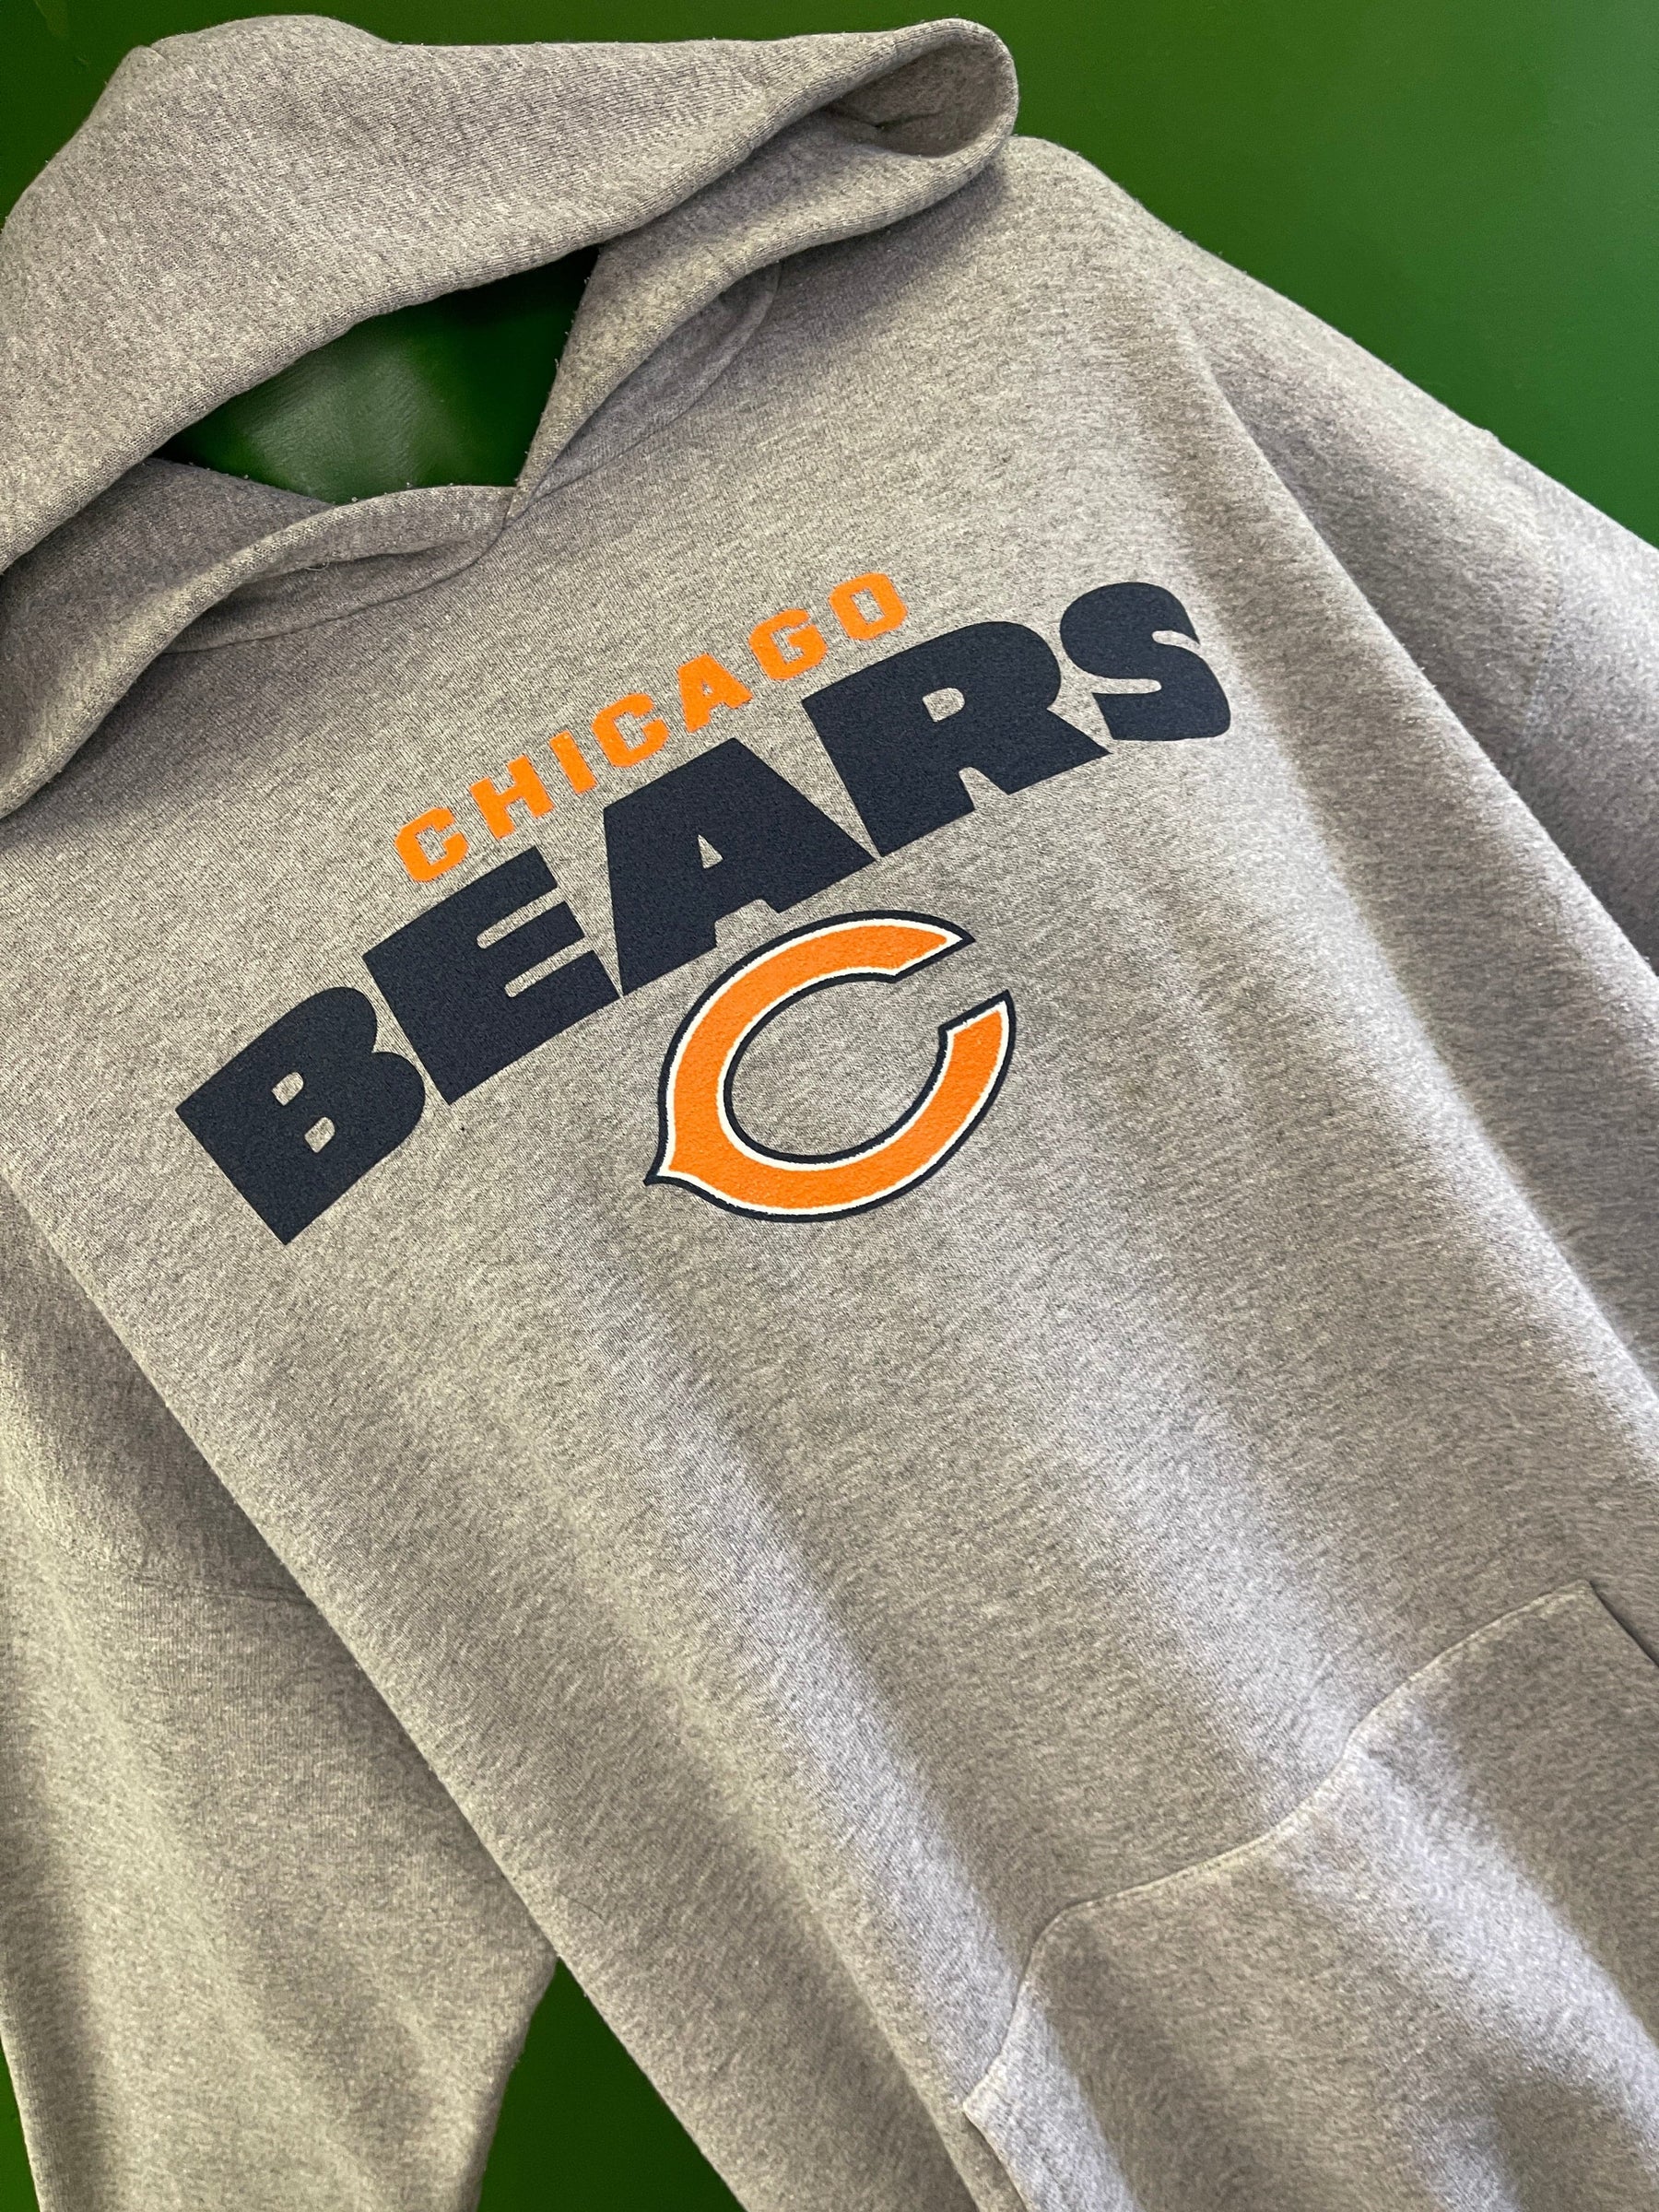 NFL Chicago Bears Heathered Grey Pullover Hoodie Men's X-Large